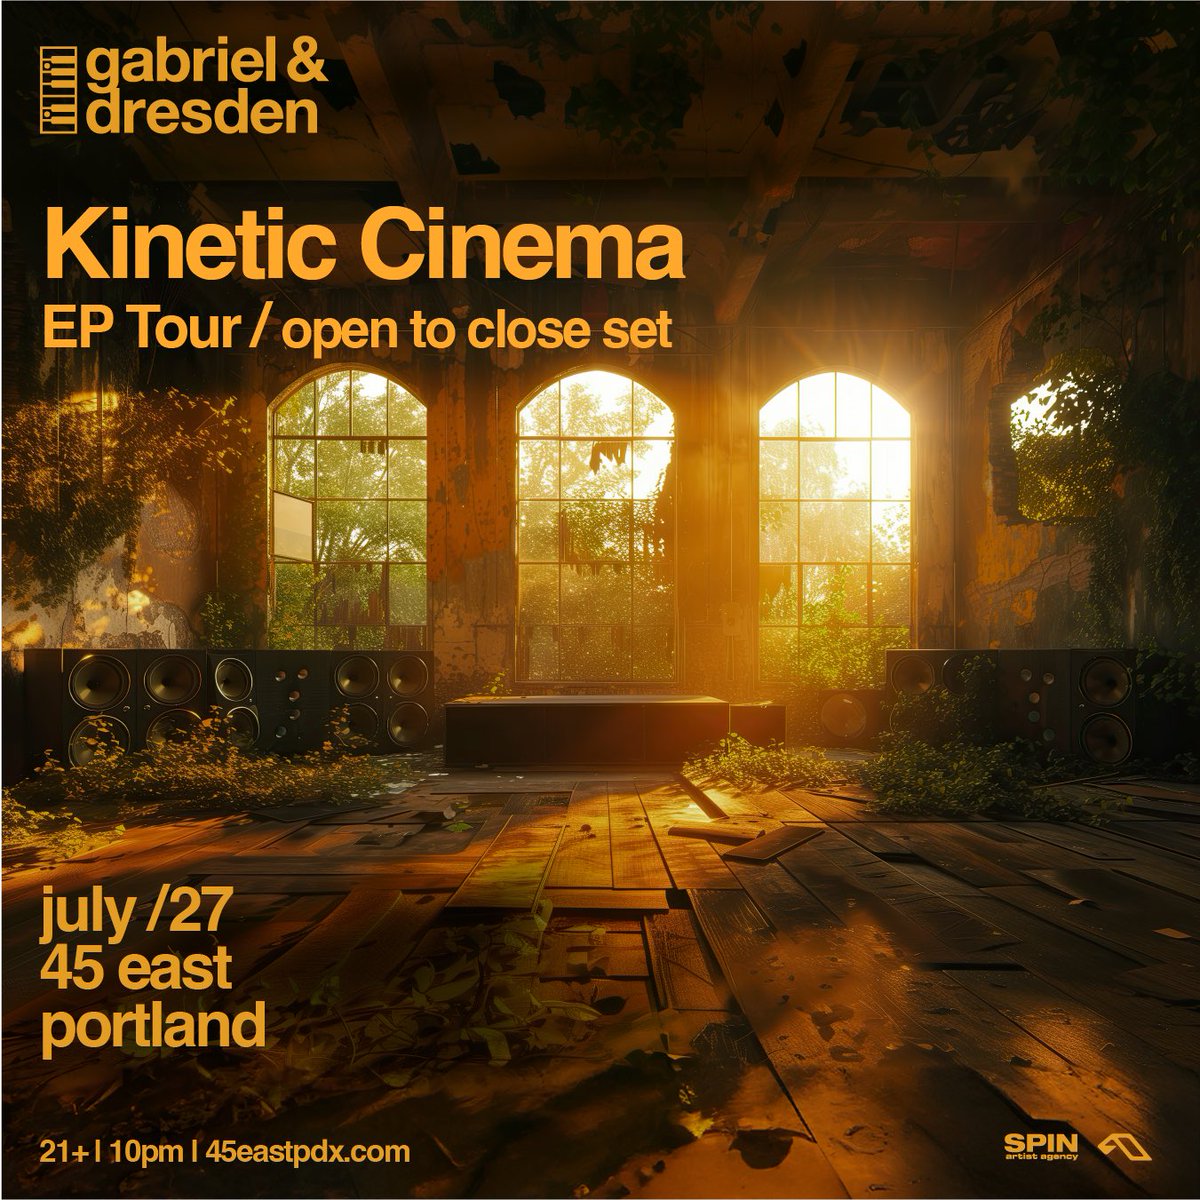 Set sail through the sounds of @GabrielNDresden when they return to the club with a special open to close set for their Kinetic Cinema tour on Saturday, July 27th! 🙌🏽🏵️